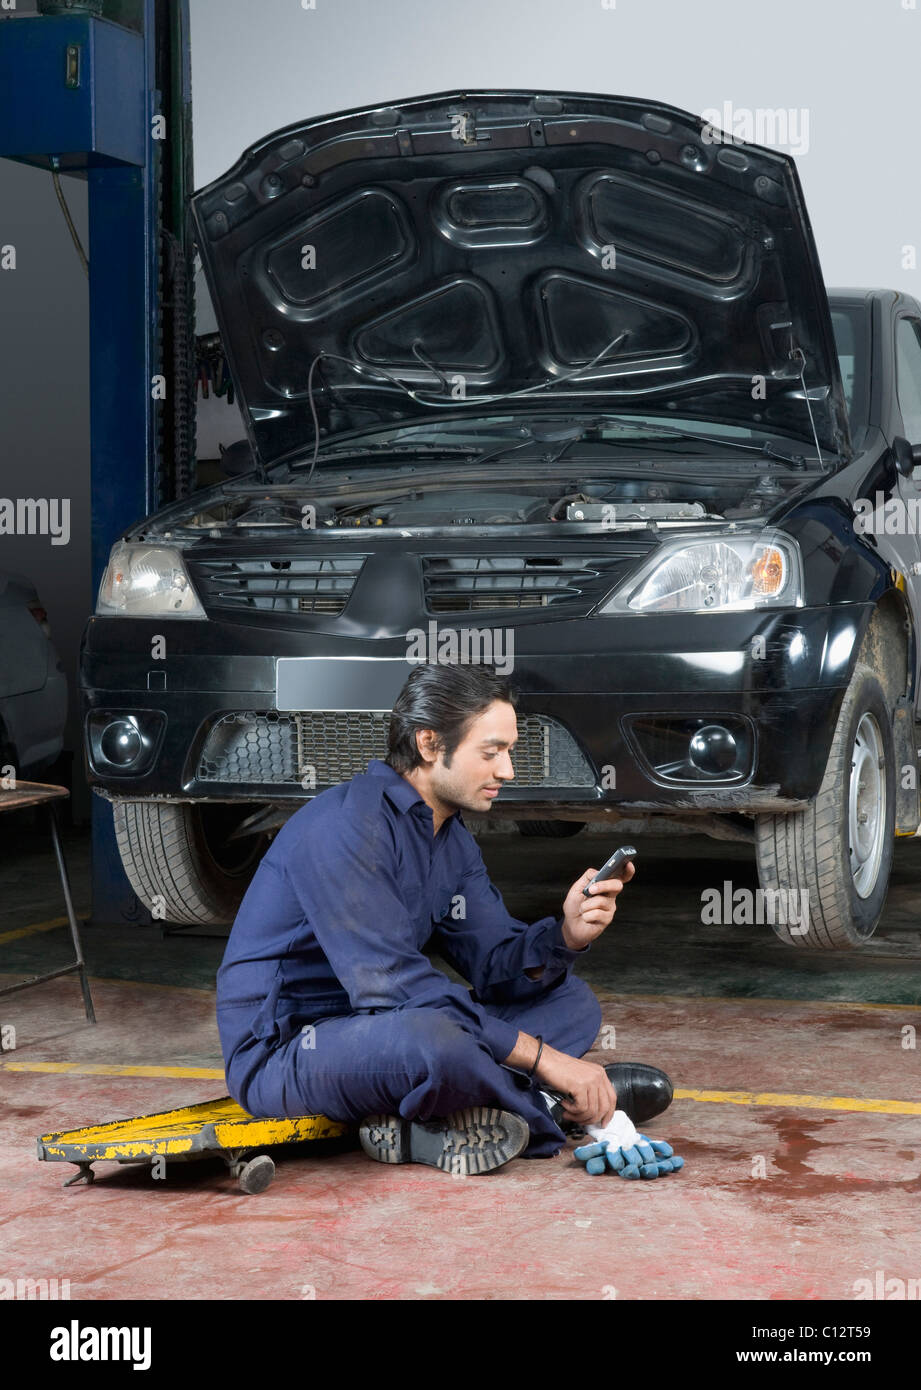 Auto mechanic using a mobile phone in a garage Stock Photo